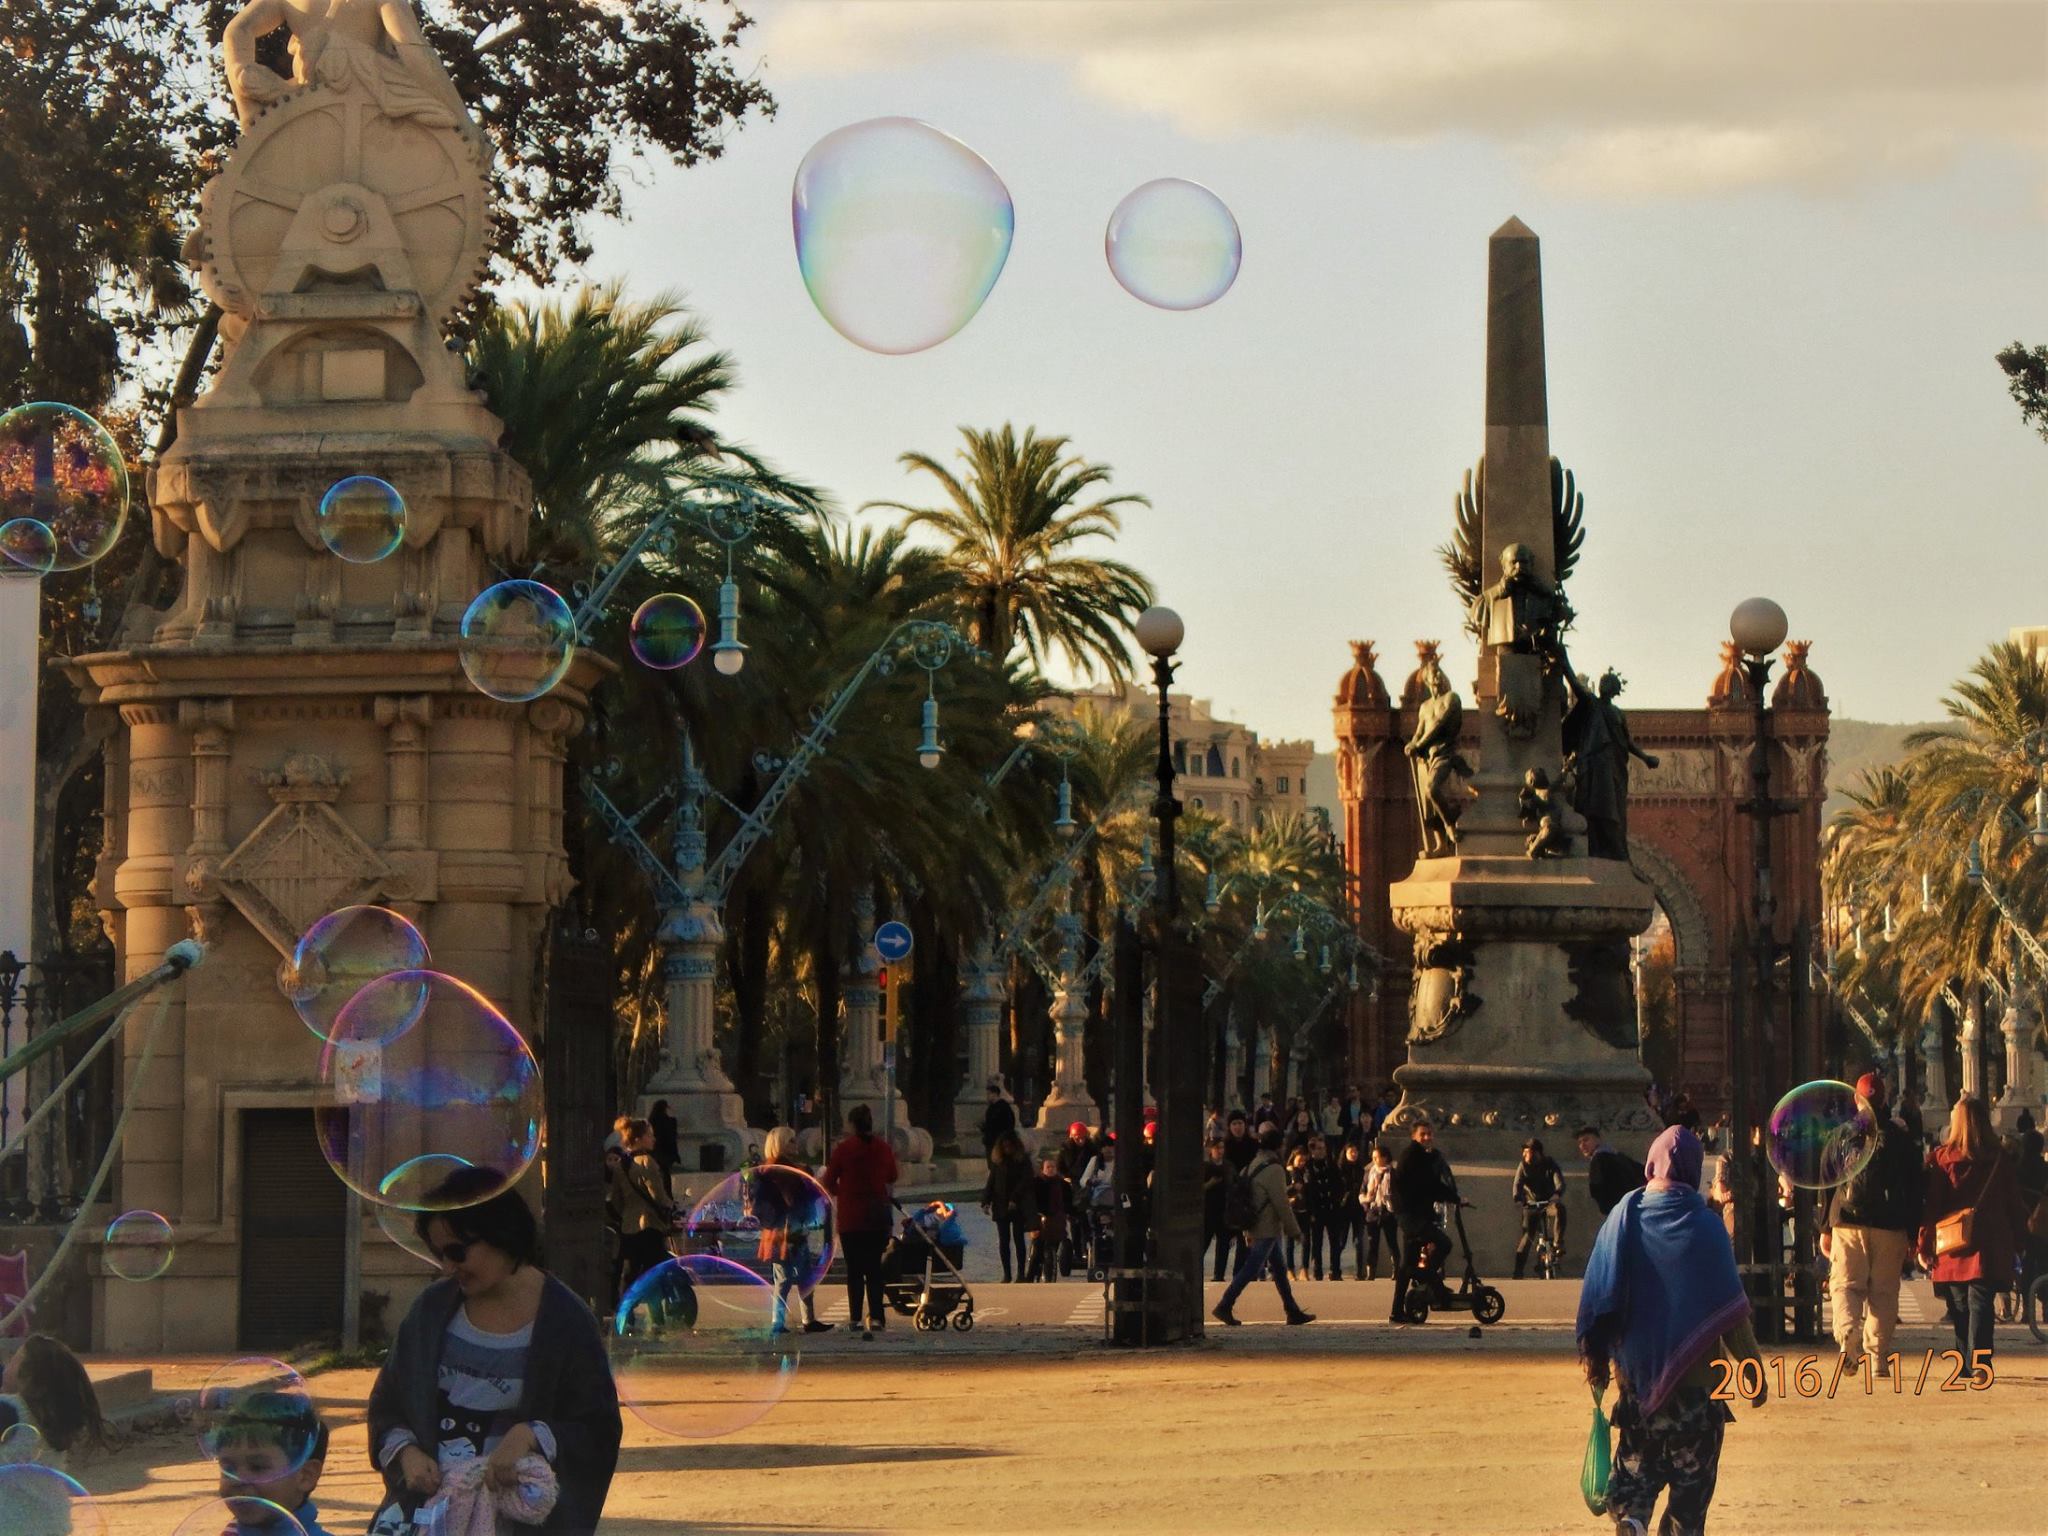 Bubbles In The Air In Barcelona